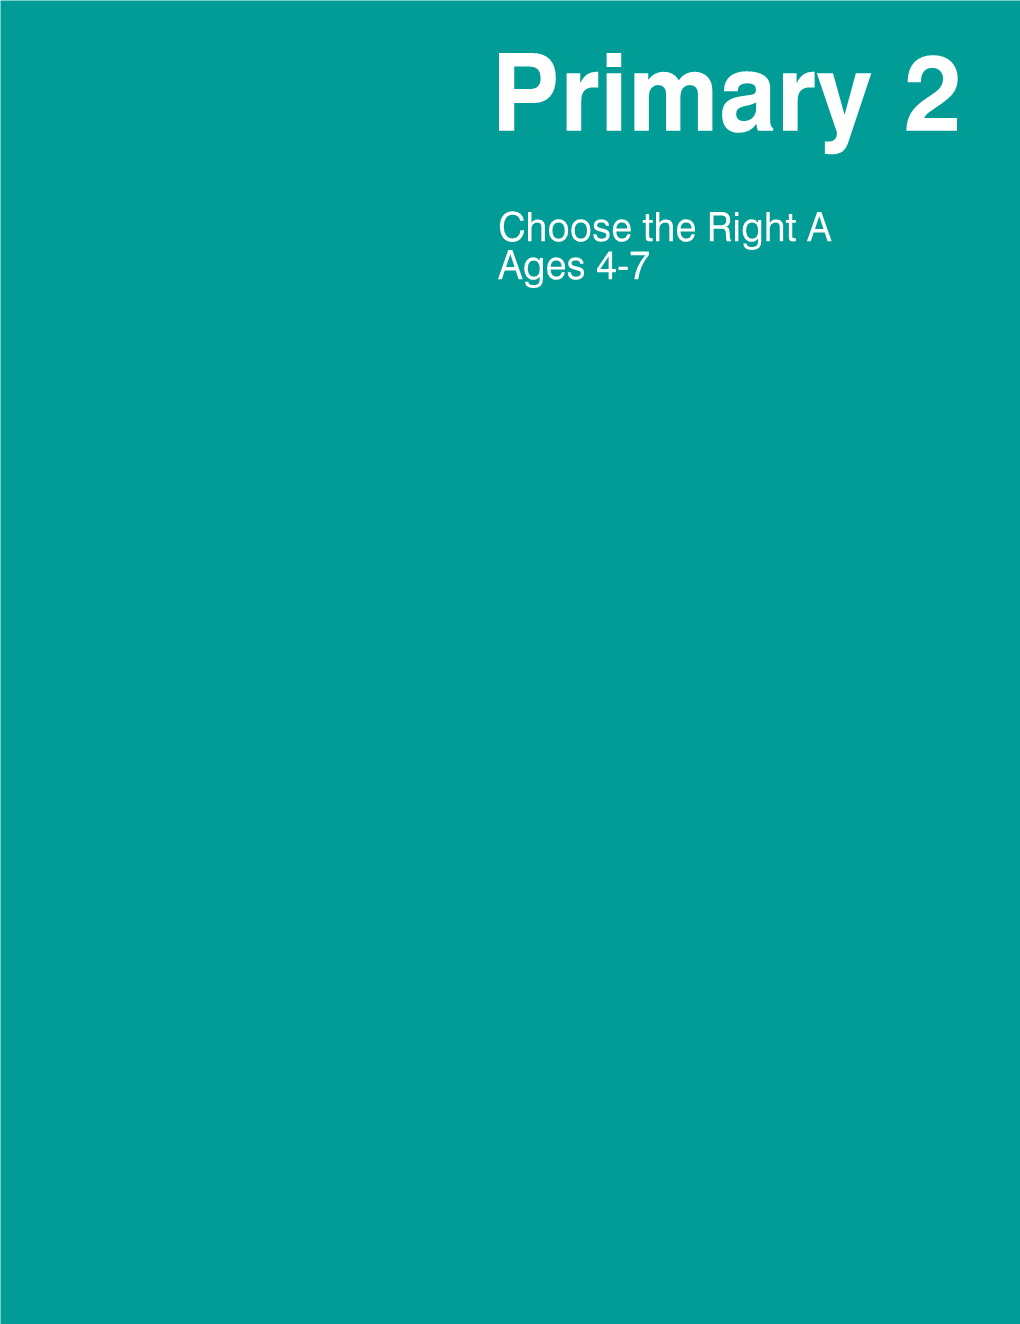 Primary 2 Manual: Choose the Right A